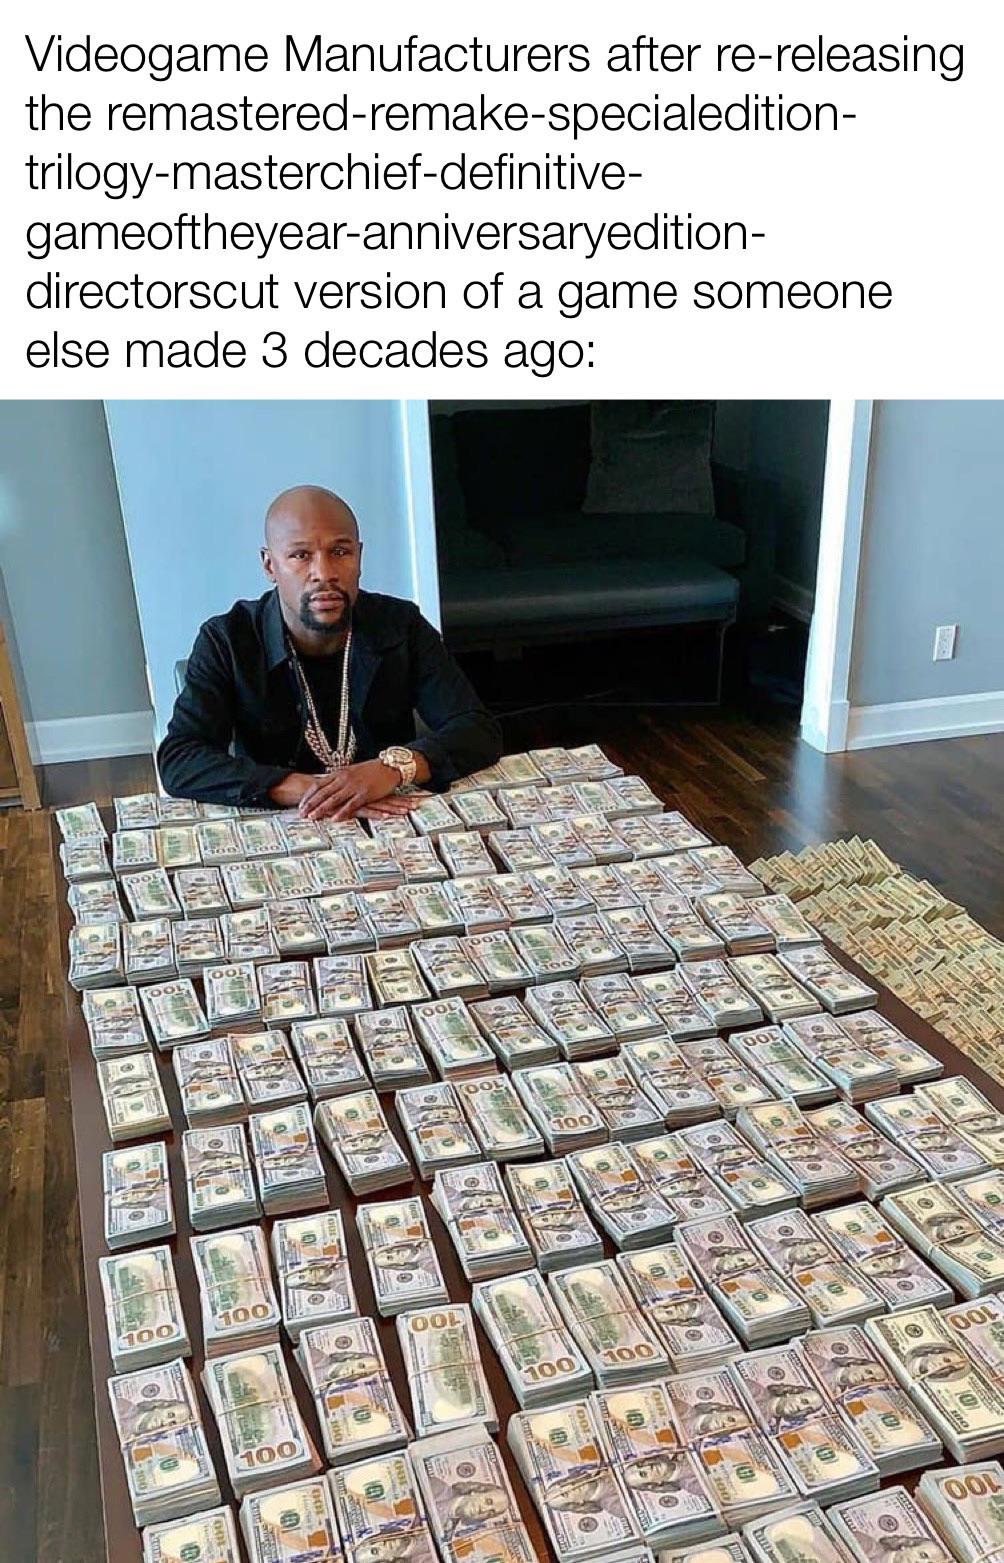 gaming memes - floyd mayweather broke - Videogame Manufacturers after rereleasing the remasteredremakespecialedition trilogymasterchiefdefinitive gameoftheyearanniversaryedition directorscut version of a game someone else made 3 decades ago G 100 100 100 